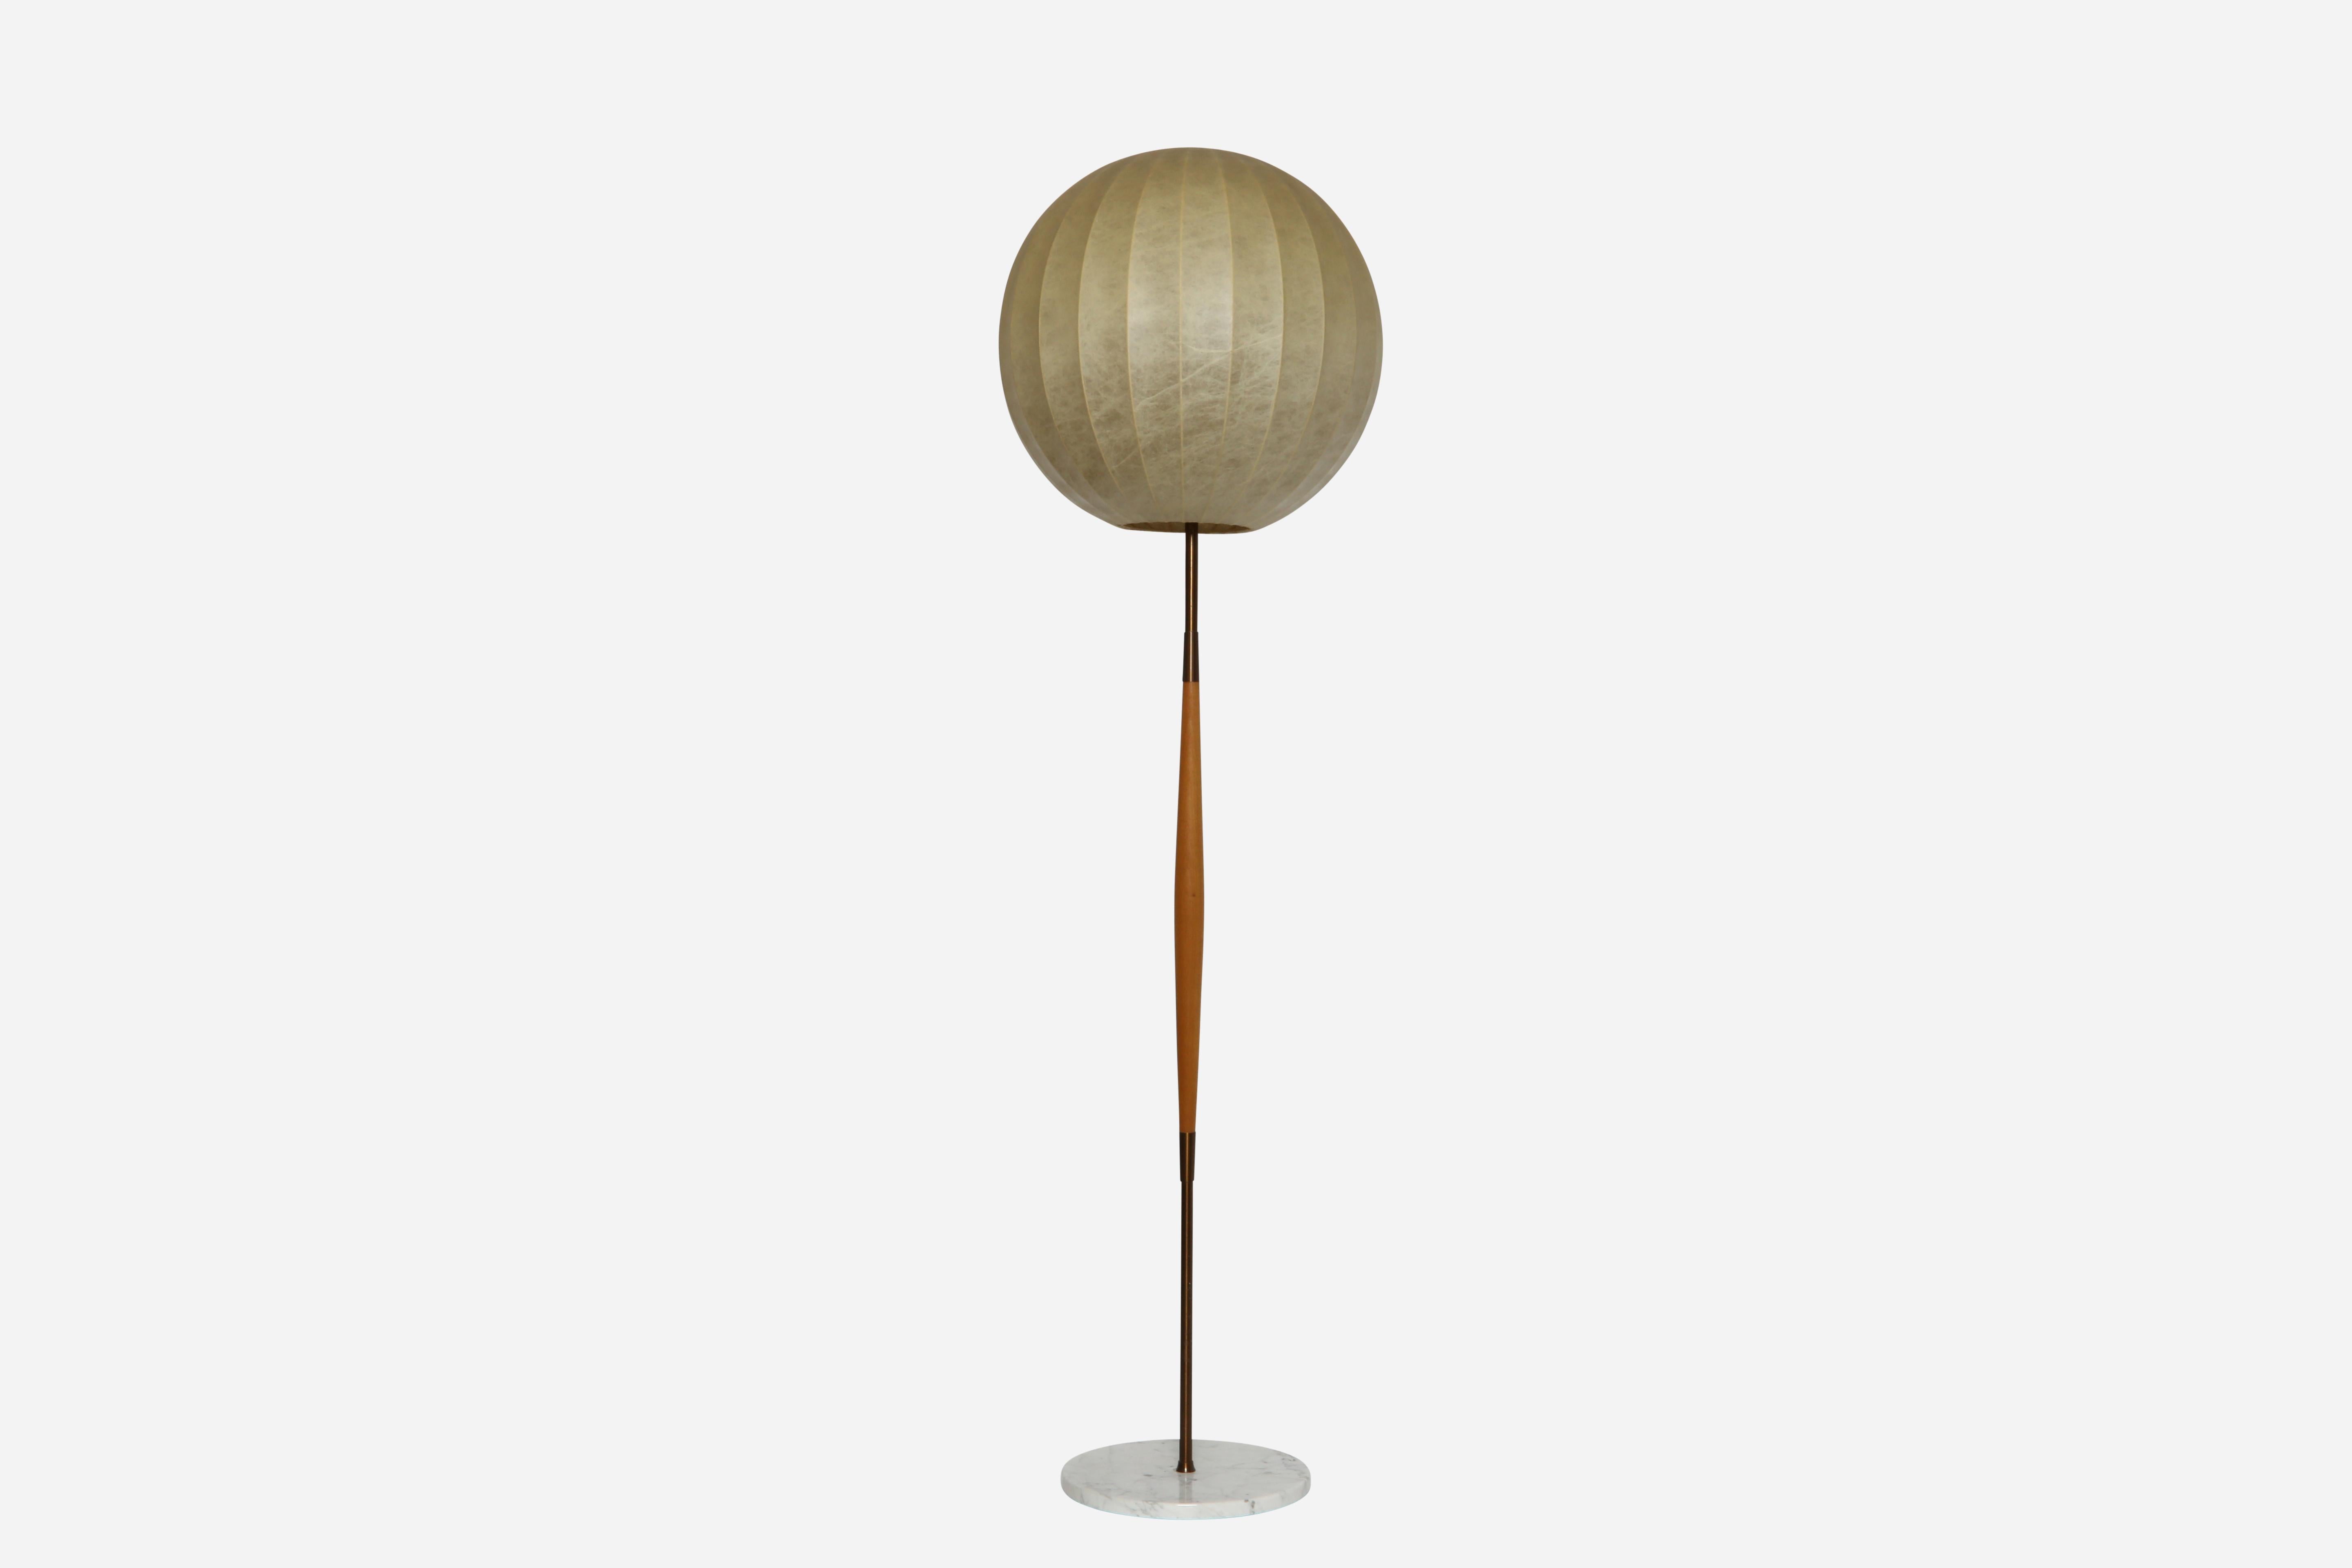 Cocoon floor lamp attributed to Achille Castiglioni for Flos.
Made in Italy in 1960s.
Resin shade, marble base, brass and wooden stem.
Has foot switch.
Takes one medium bulb.
Complimentary US rewiring upon request.

We take pride in bringing vintage